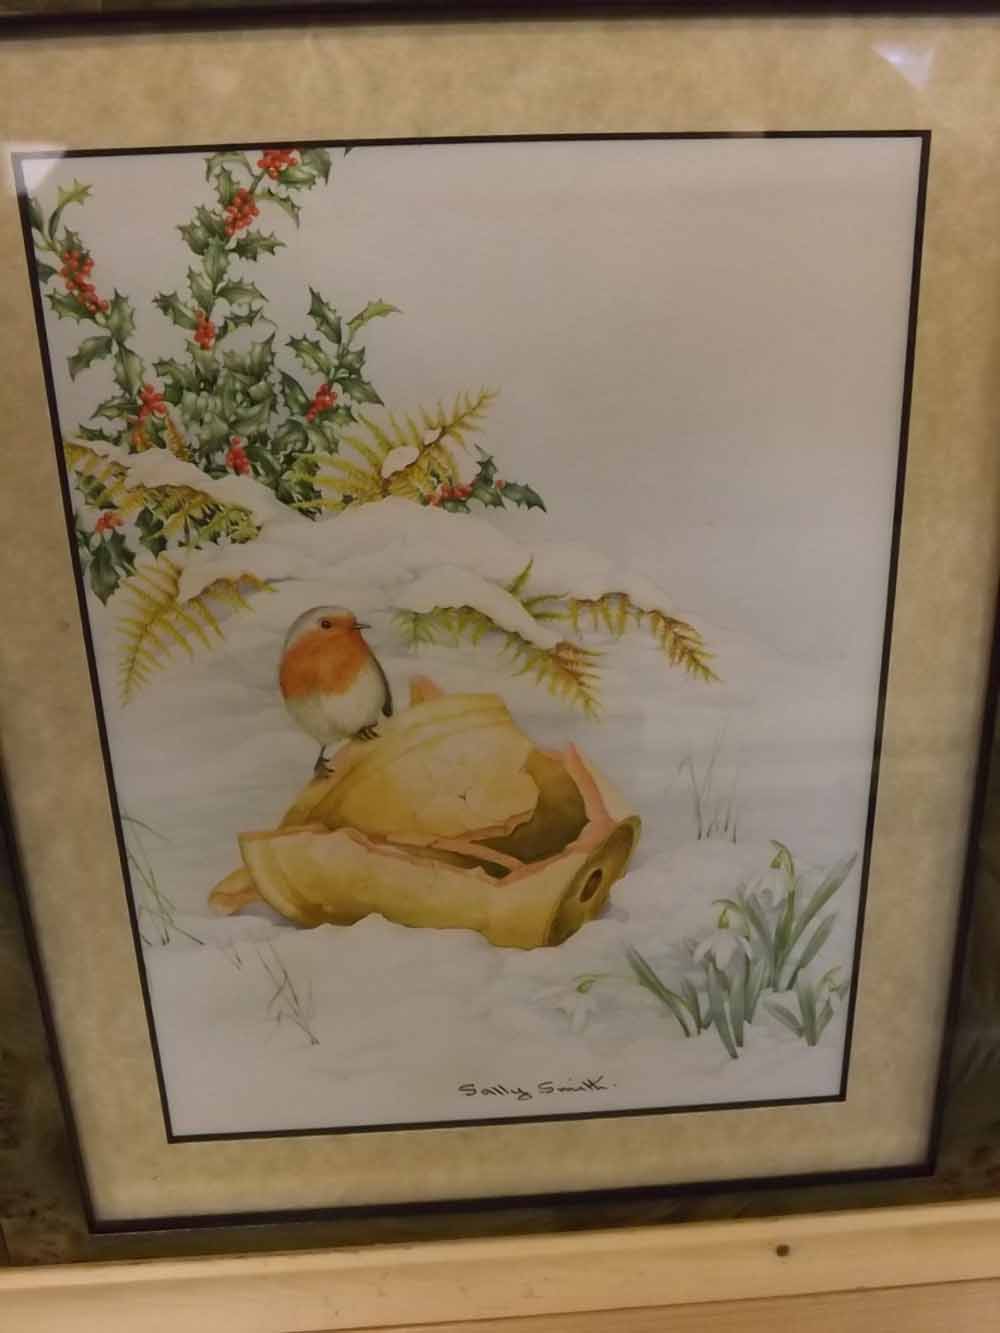 SALLY SMITH, SIGNED pair of watercolours, Robin and Bullfinch in Winter, 7 1/2" x 5 1/2" (2) - Image 2 of 2